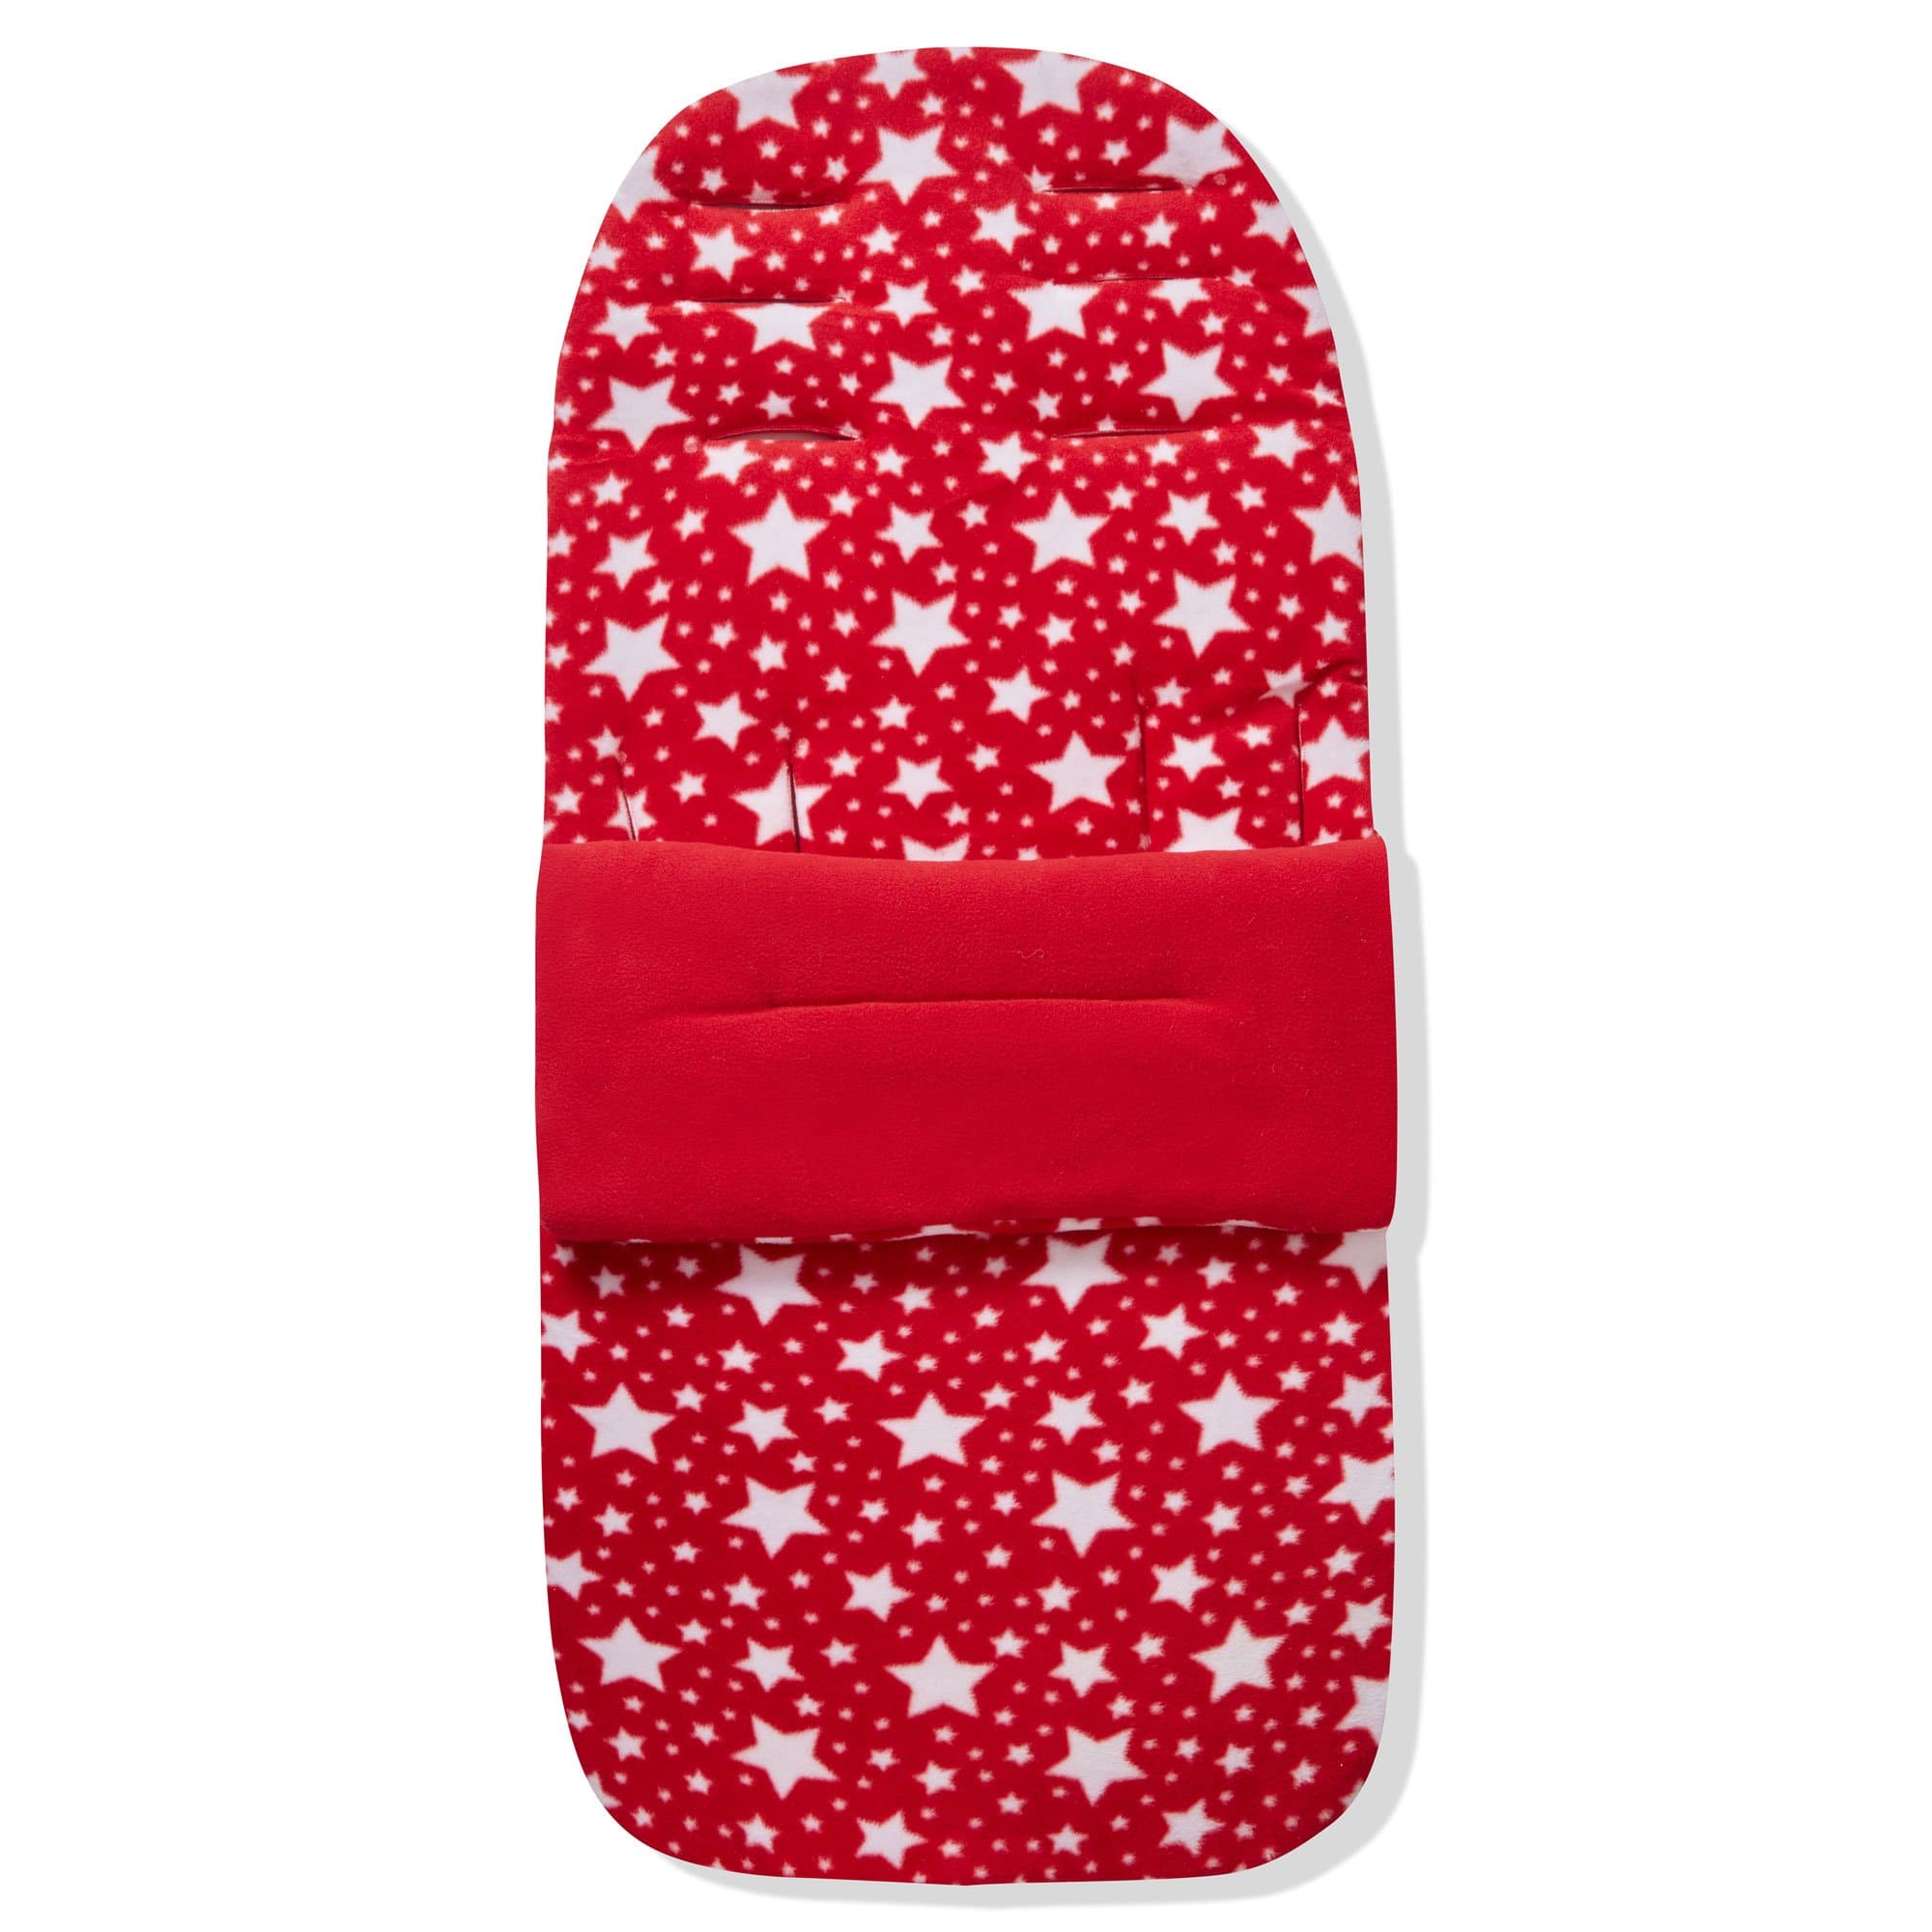 Fleece Footmuff / Cosy Toes Compatible with Greentom - Red Star / Fits All Models | For Your Little One